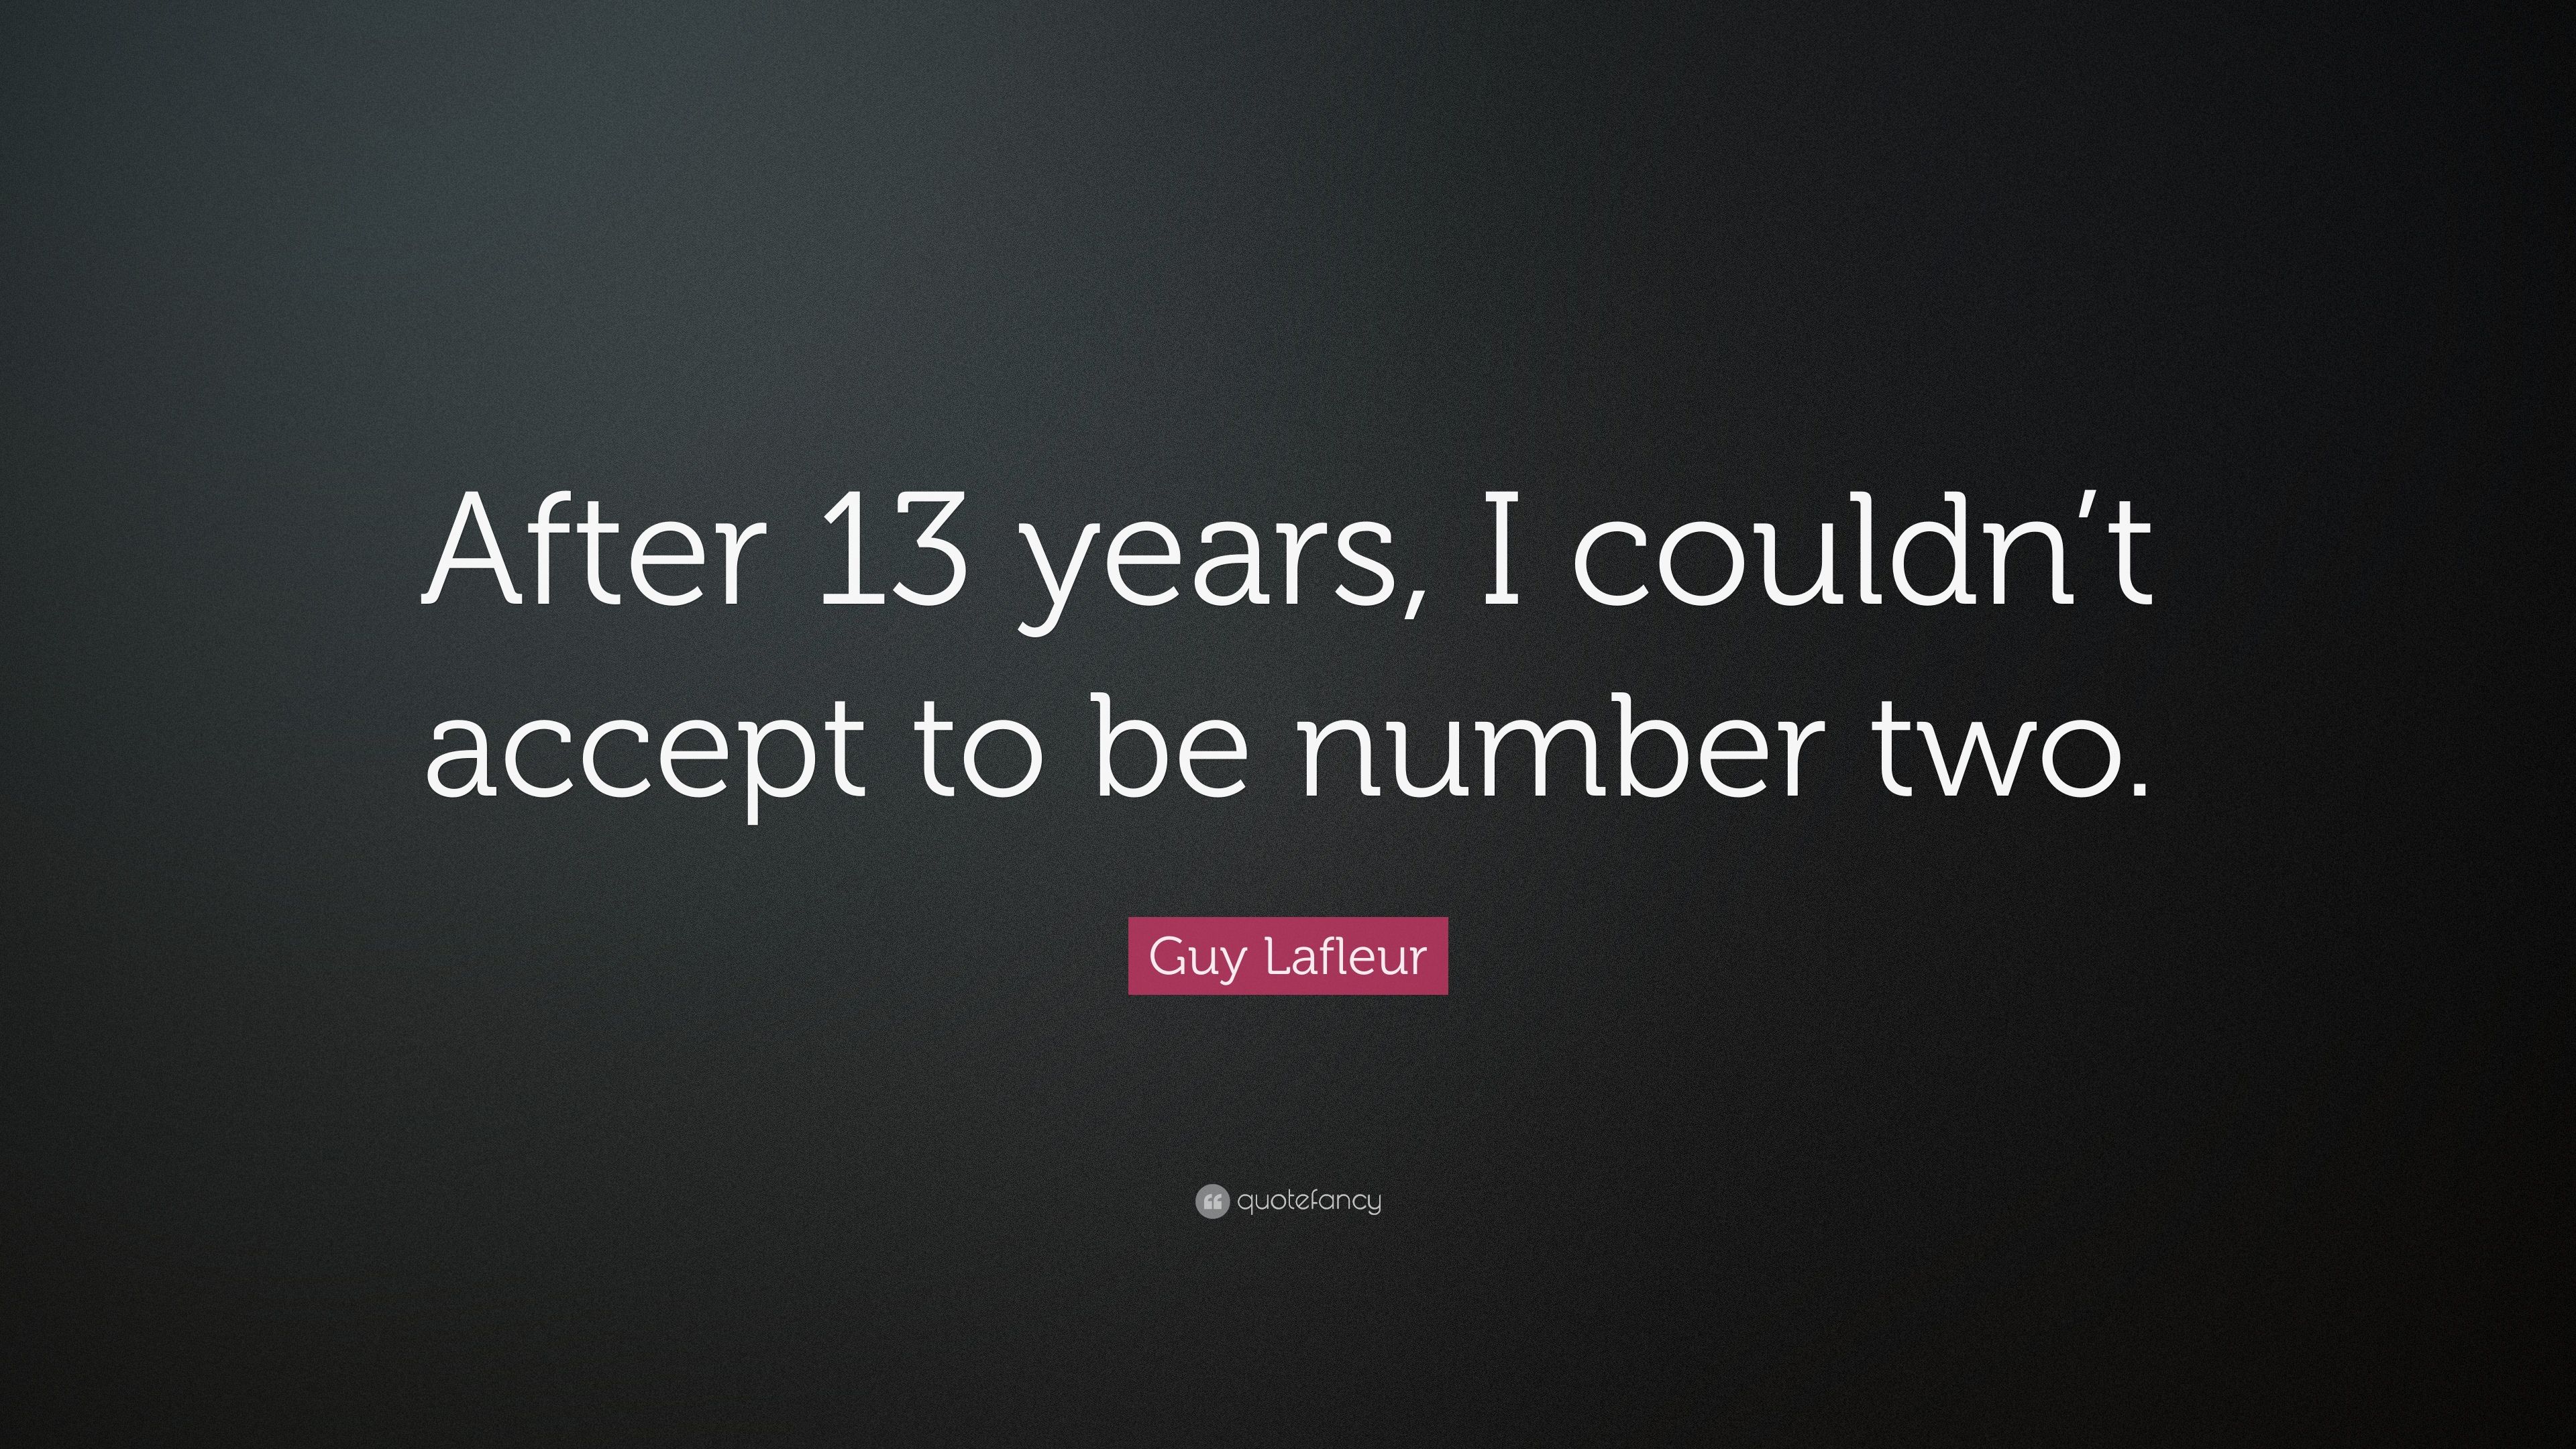 Guy Lafleur Quote: “After 13 years, I couldn't accept to be number